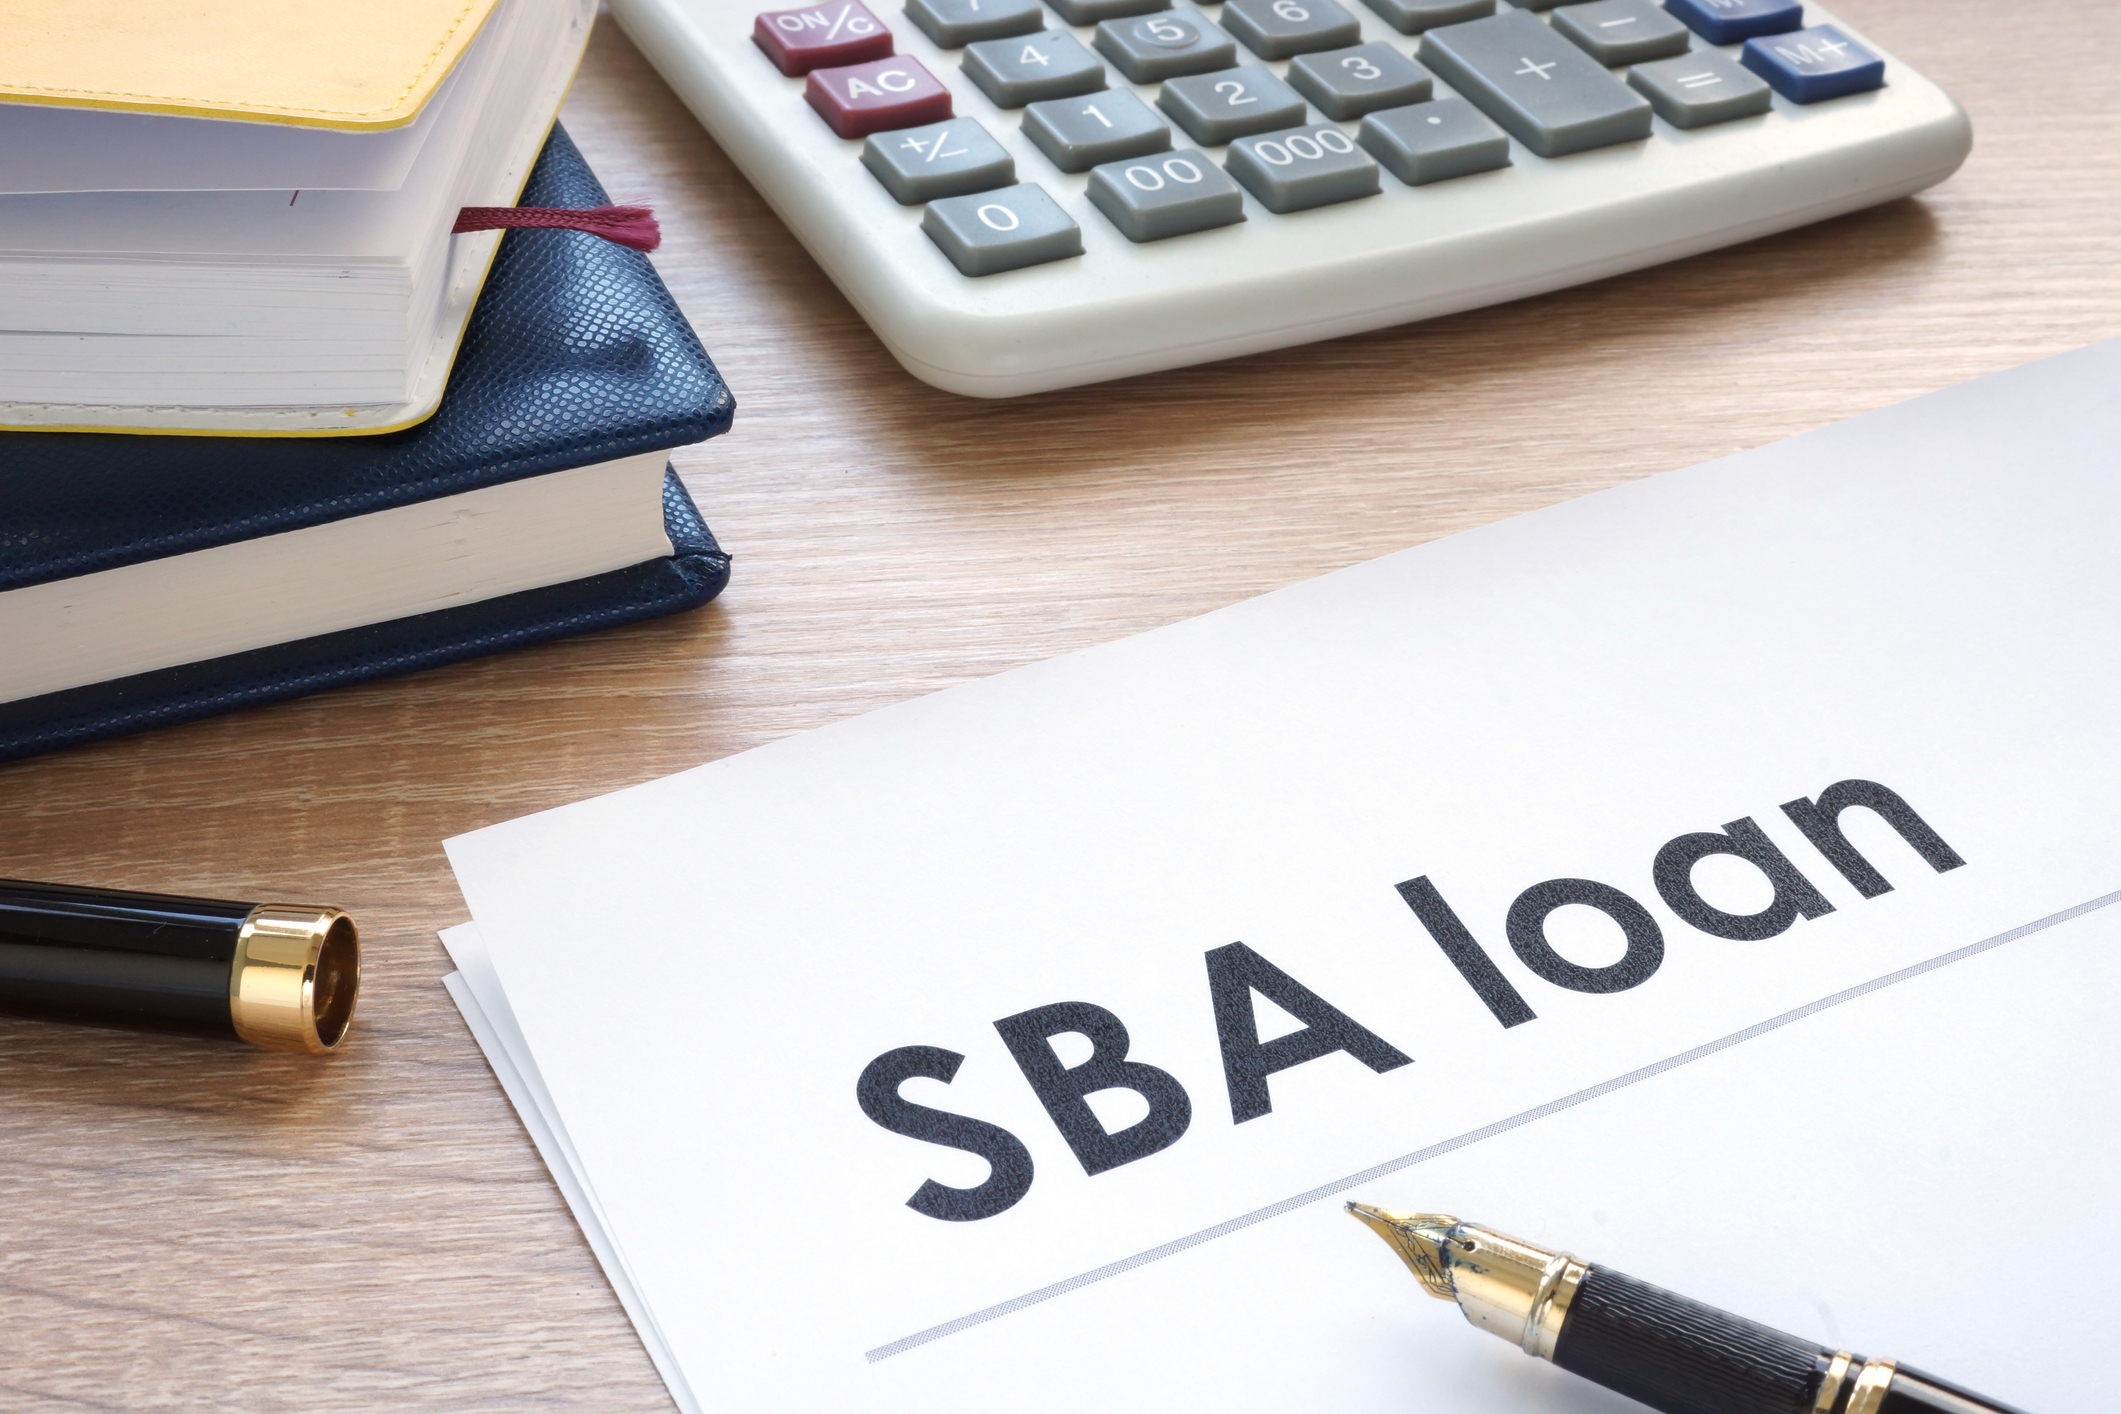 Find Your Financing for Your New Medical Practice, SBA loan form on office table